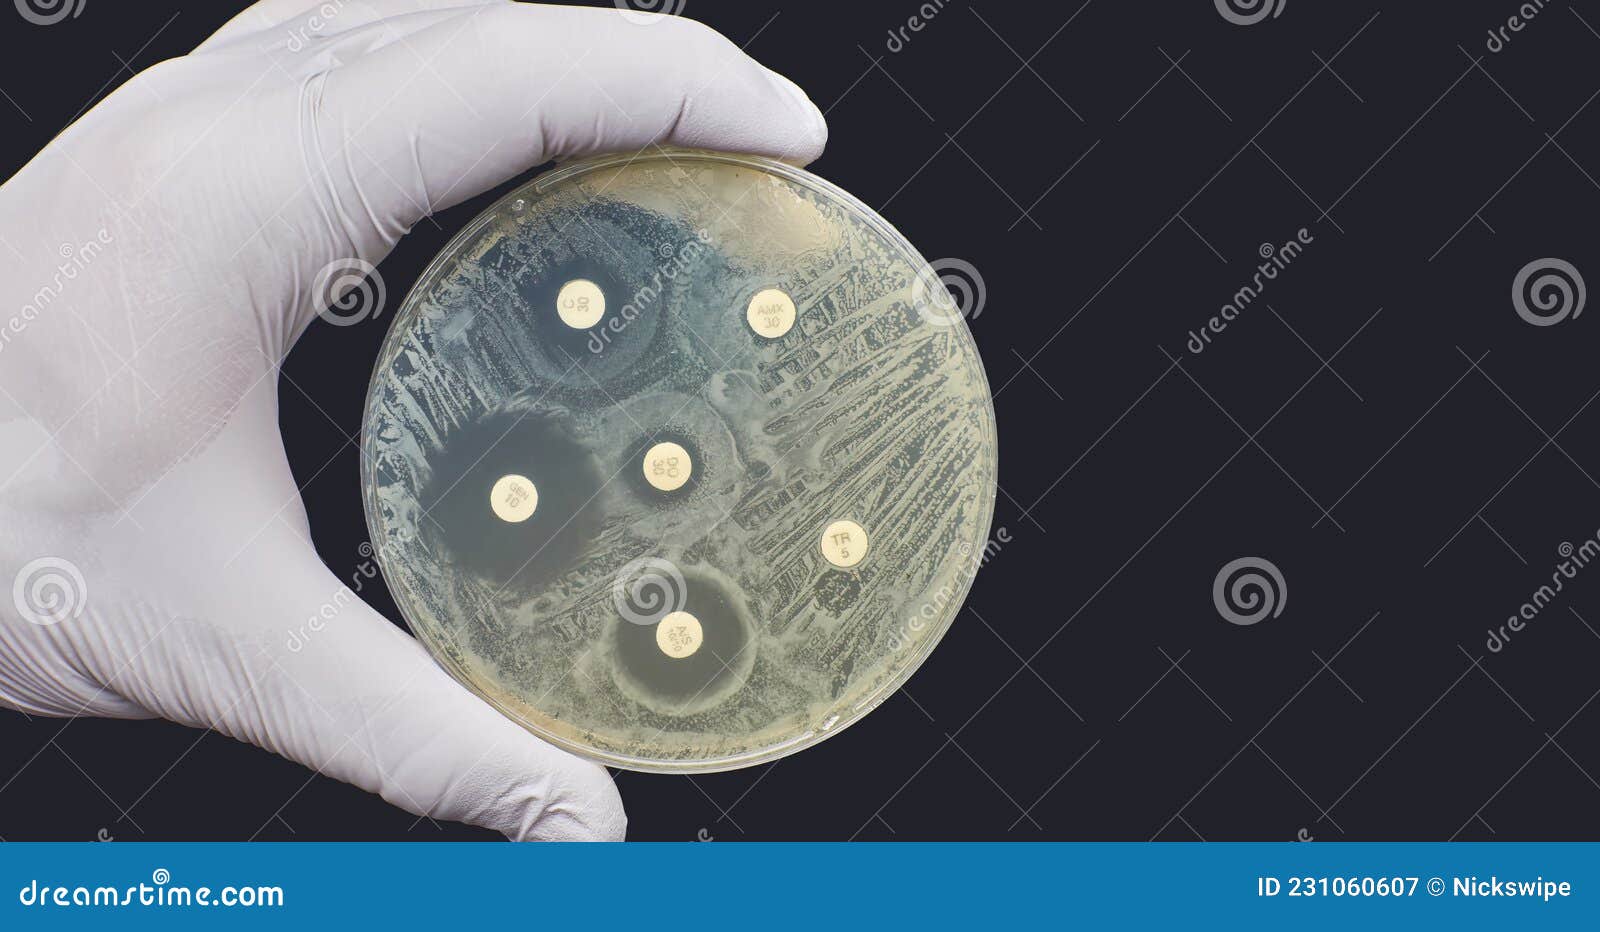 Antibiogram Kirby Bauer Antimicrobial Susceptibility Resistance Diffusion  Test Stock Image - Image of resistance, experiment: 231060607